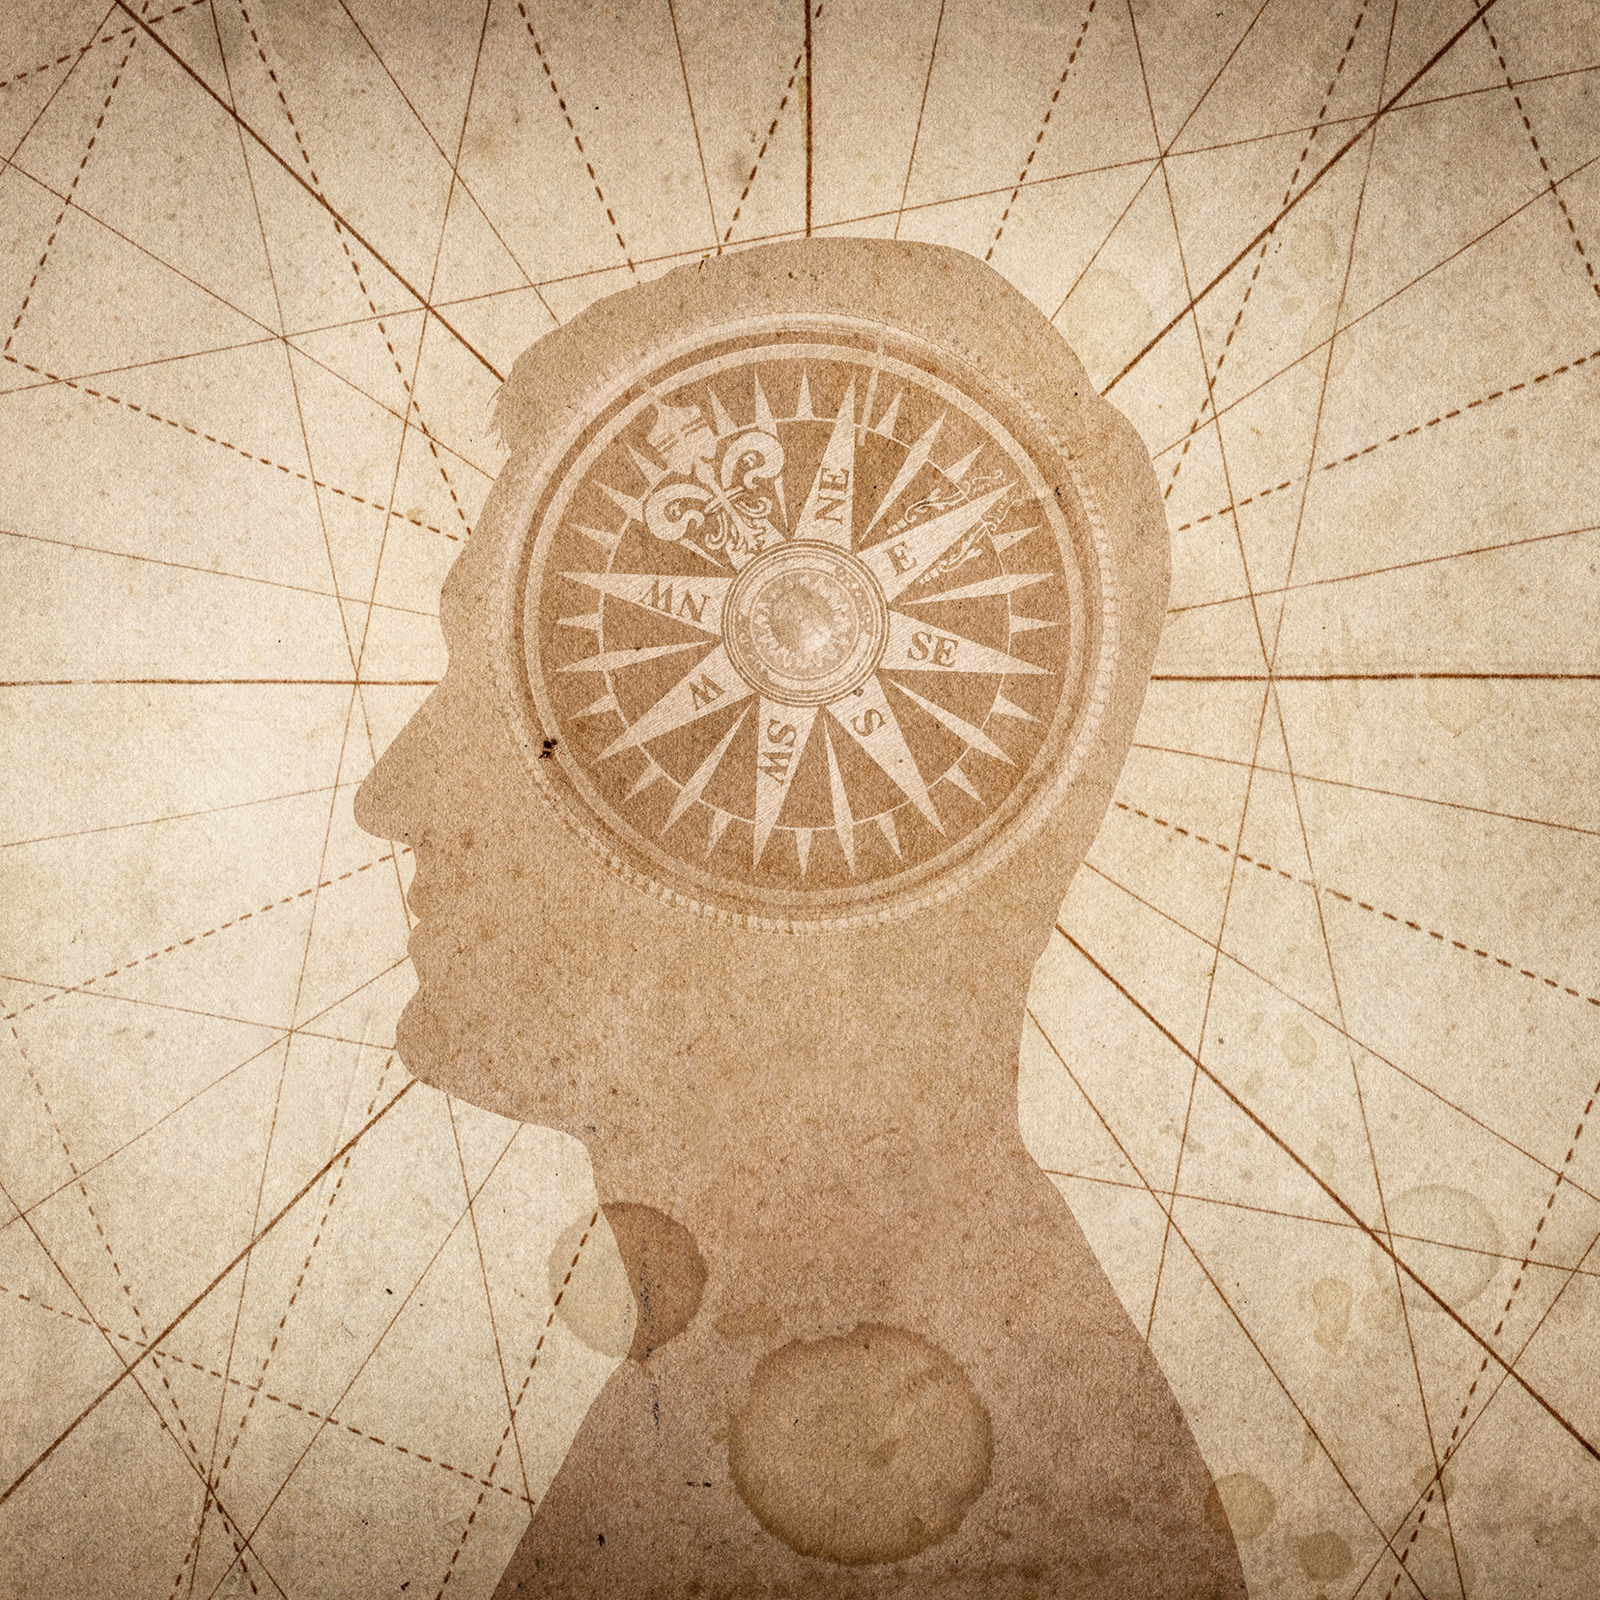 Compass for head space